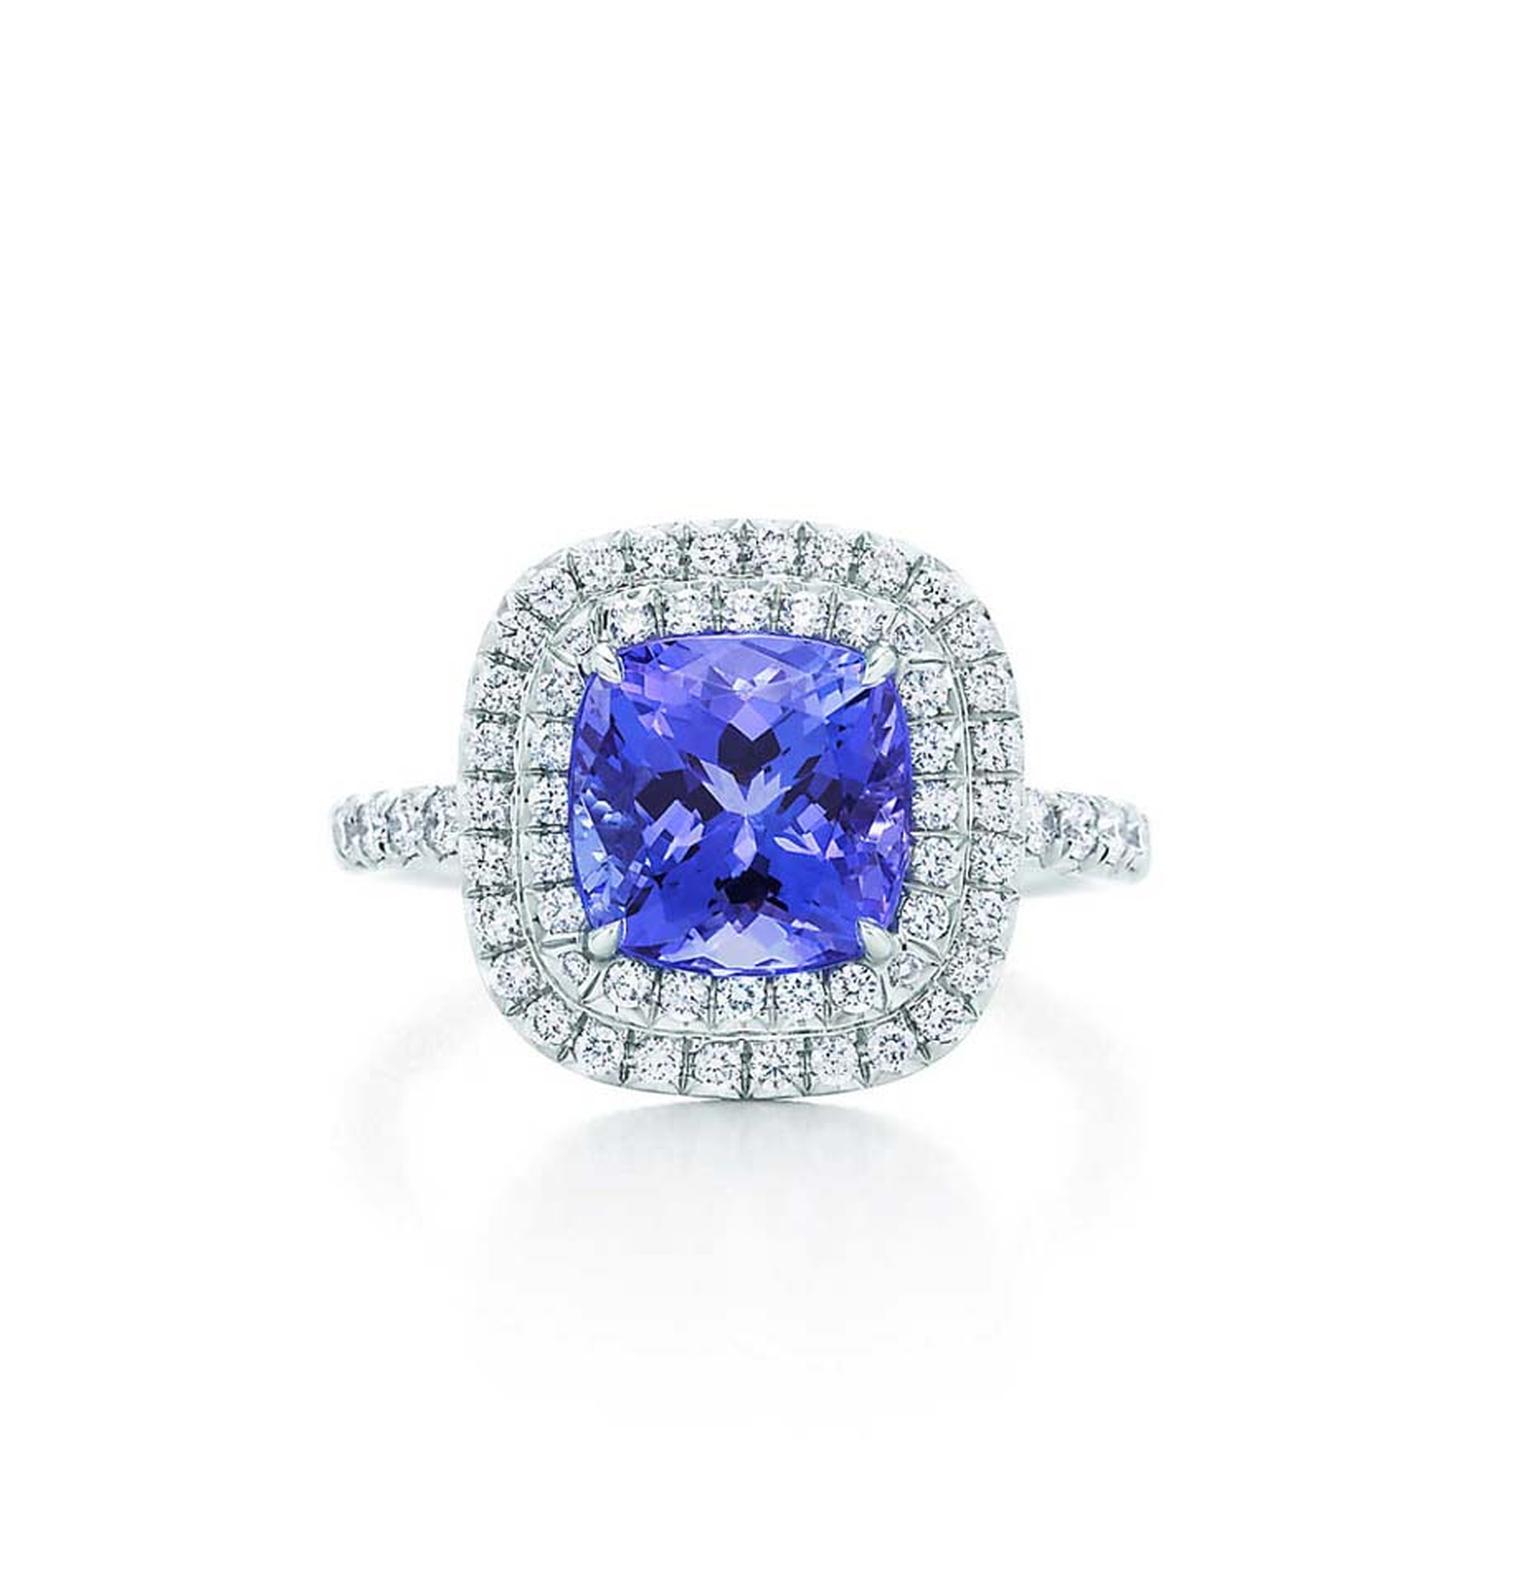 Tiffany Soleste cushion-cut tanzanite ring in platinum, with a double row of round brilliant diamonds (£7,125).